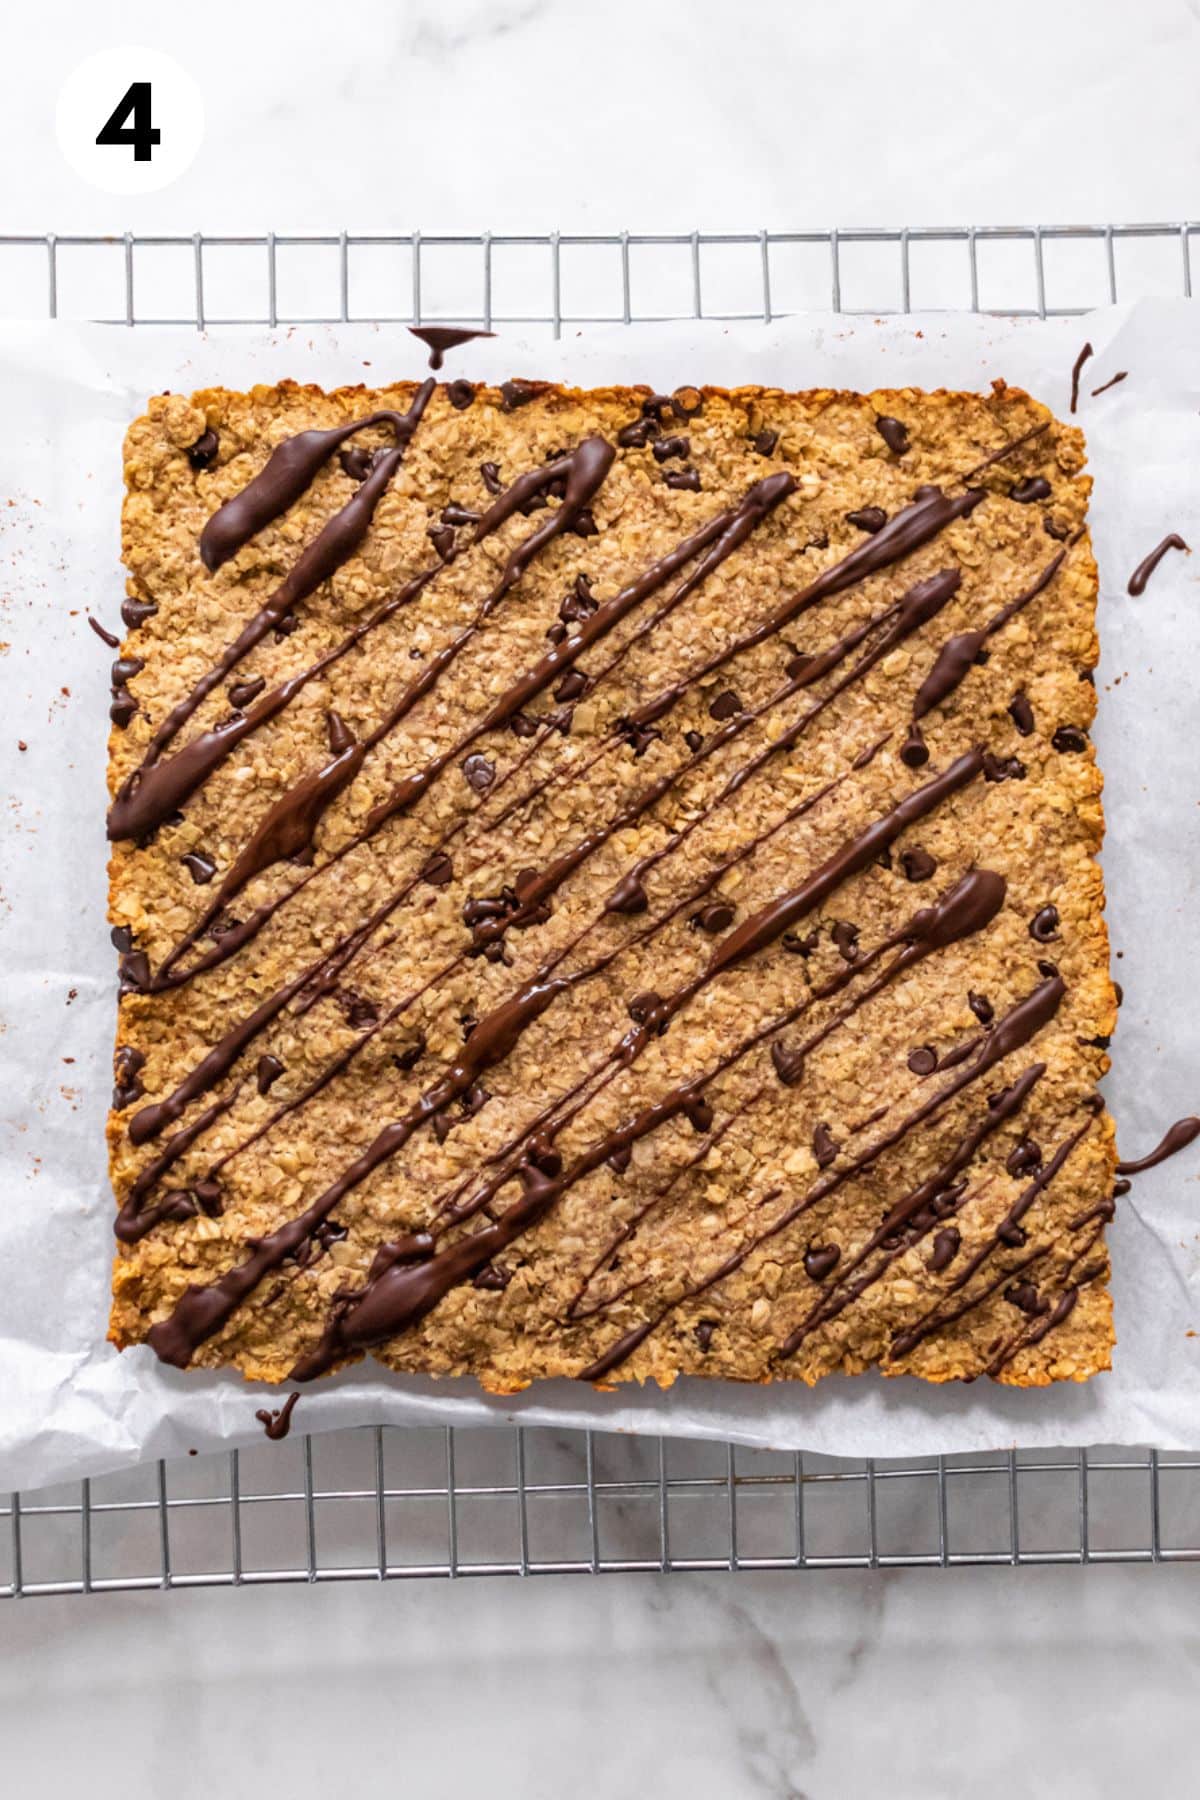 Granola bars are removed from pan and drizzled with chocolate.